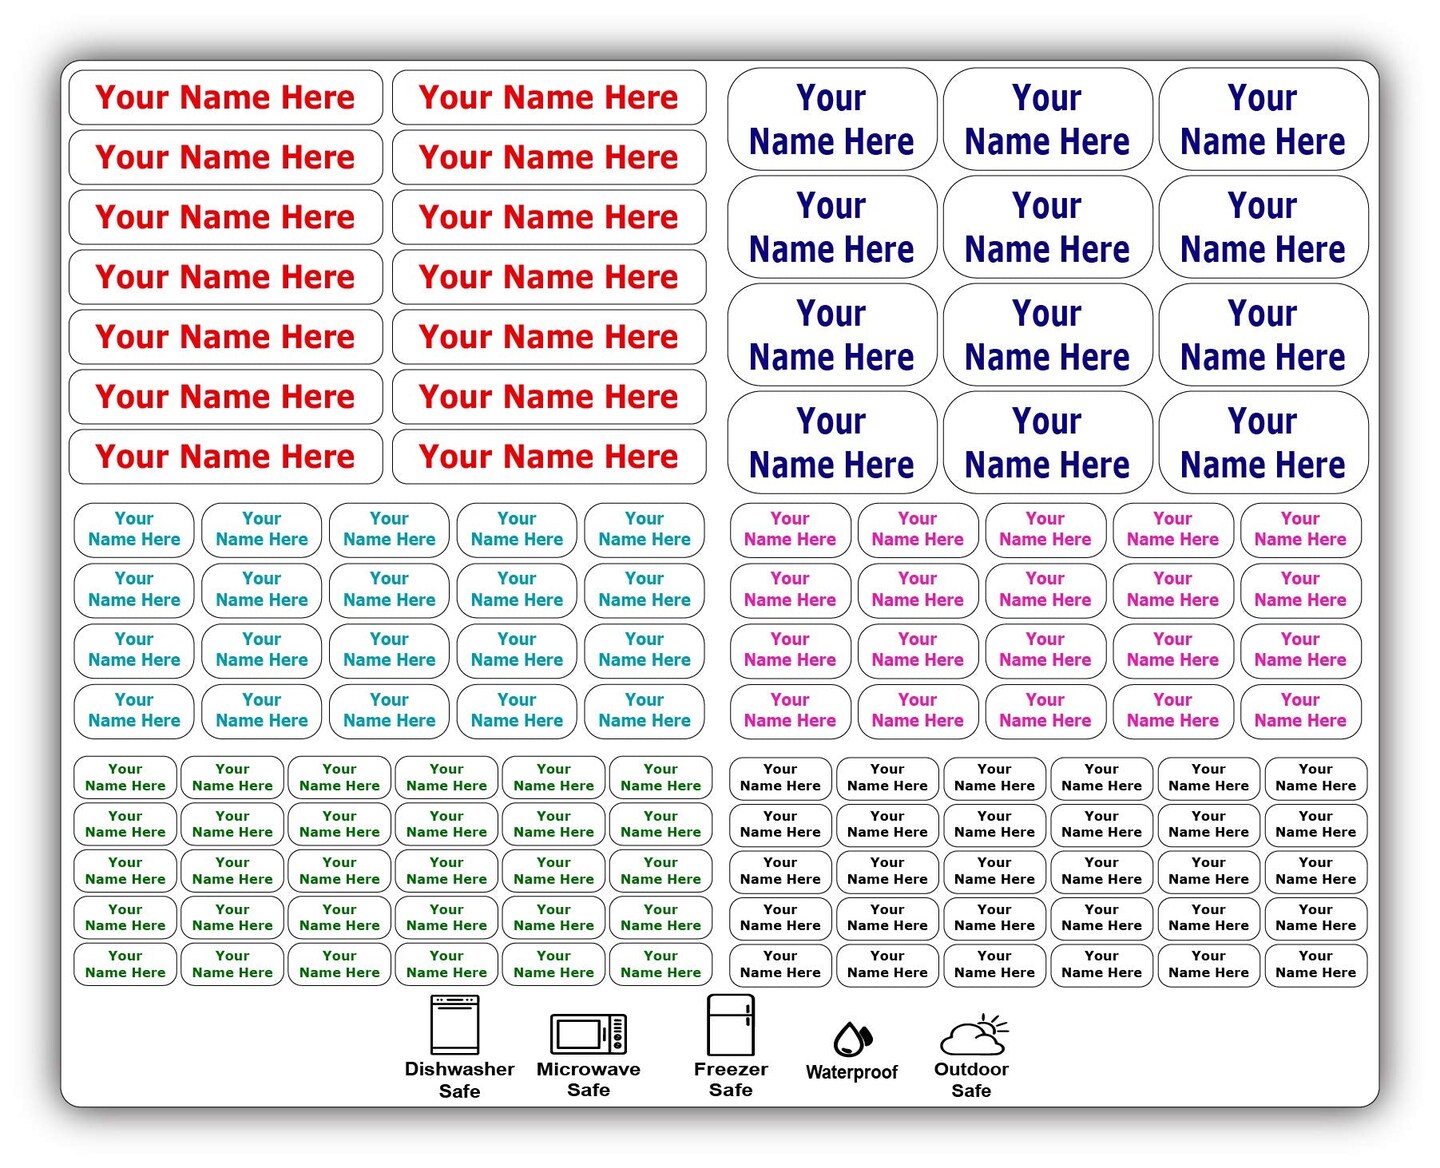 Where to Find Name Labels for School or Daycare